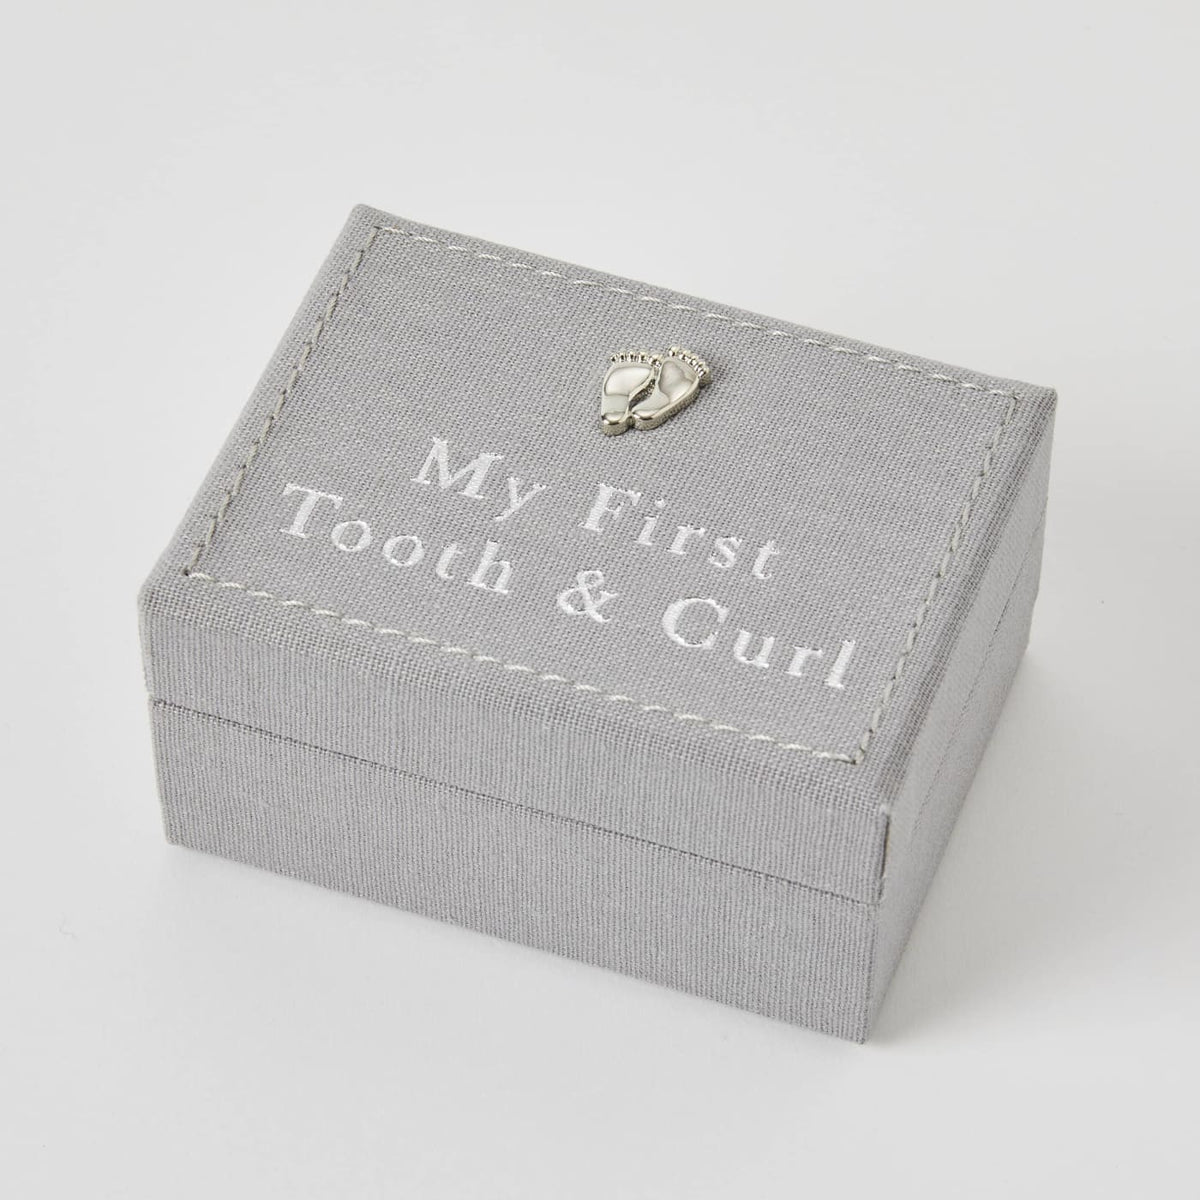 Jiggle &amp; Giggle Mini Treasures Baby Box - My First Tooth &amp; Curl - Grey - GIFTWARE - KEEPSAKES